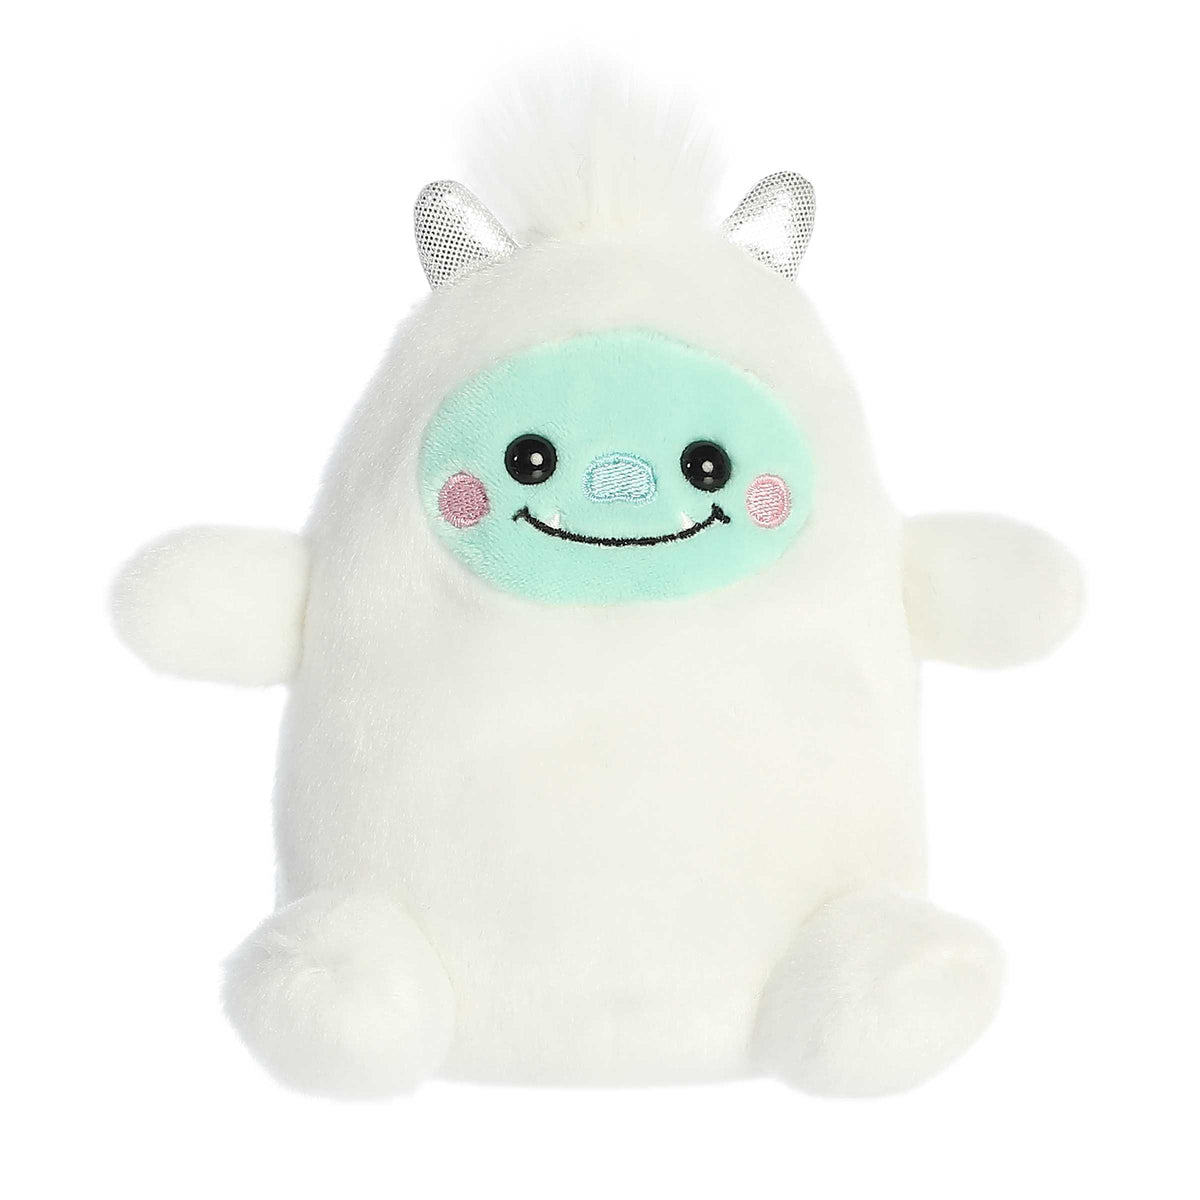 Adorable, happy, mini white yeti plush toy sitting with light blue face, silver horns, and a tuft of hair on top